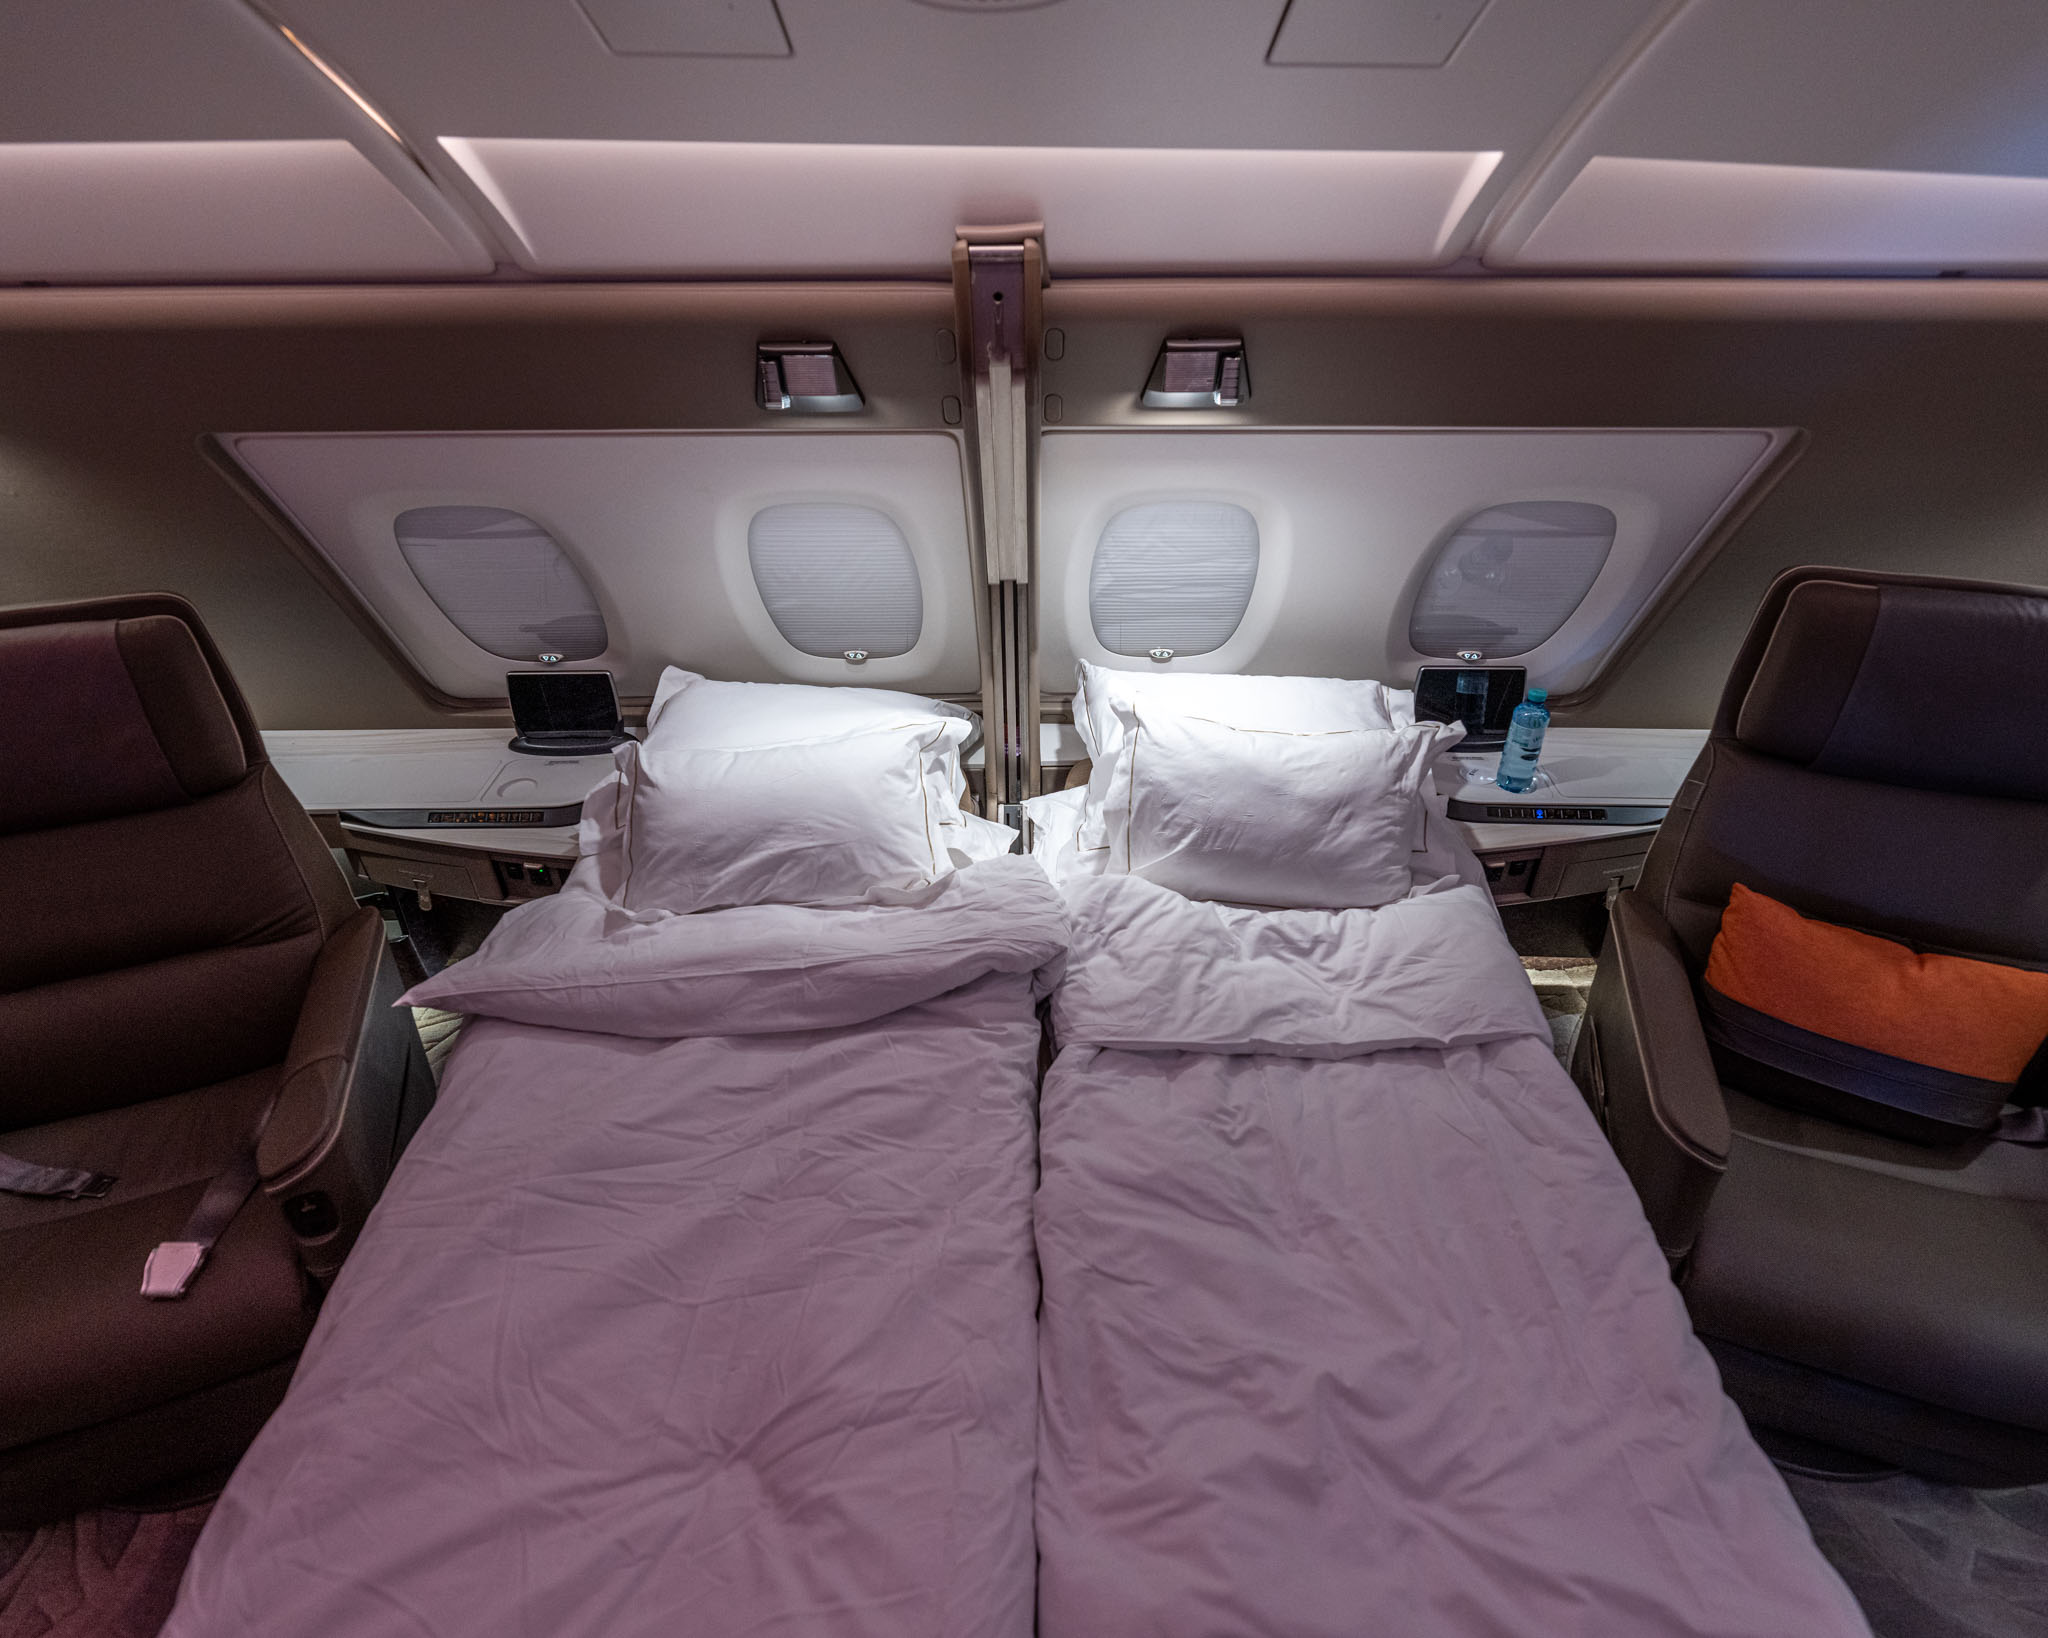 two beds in a plane